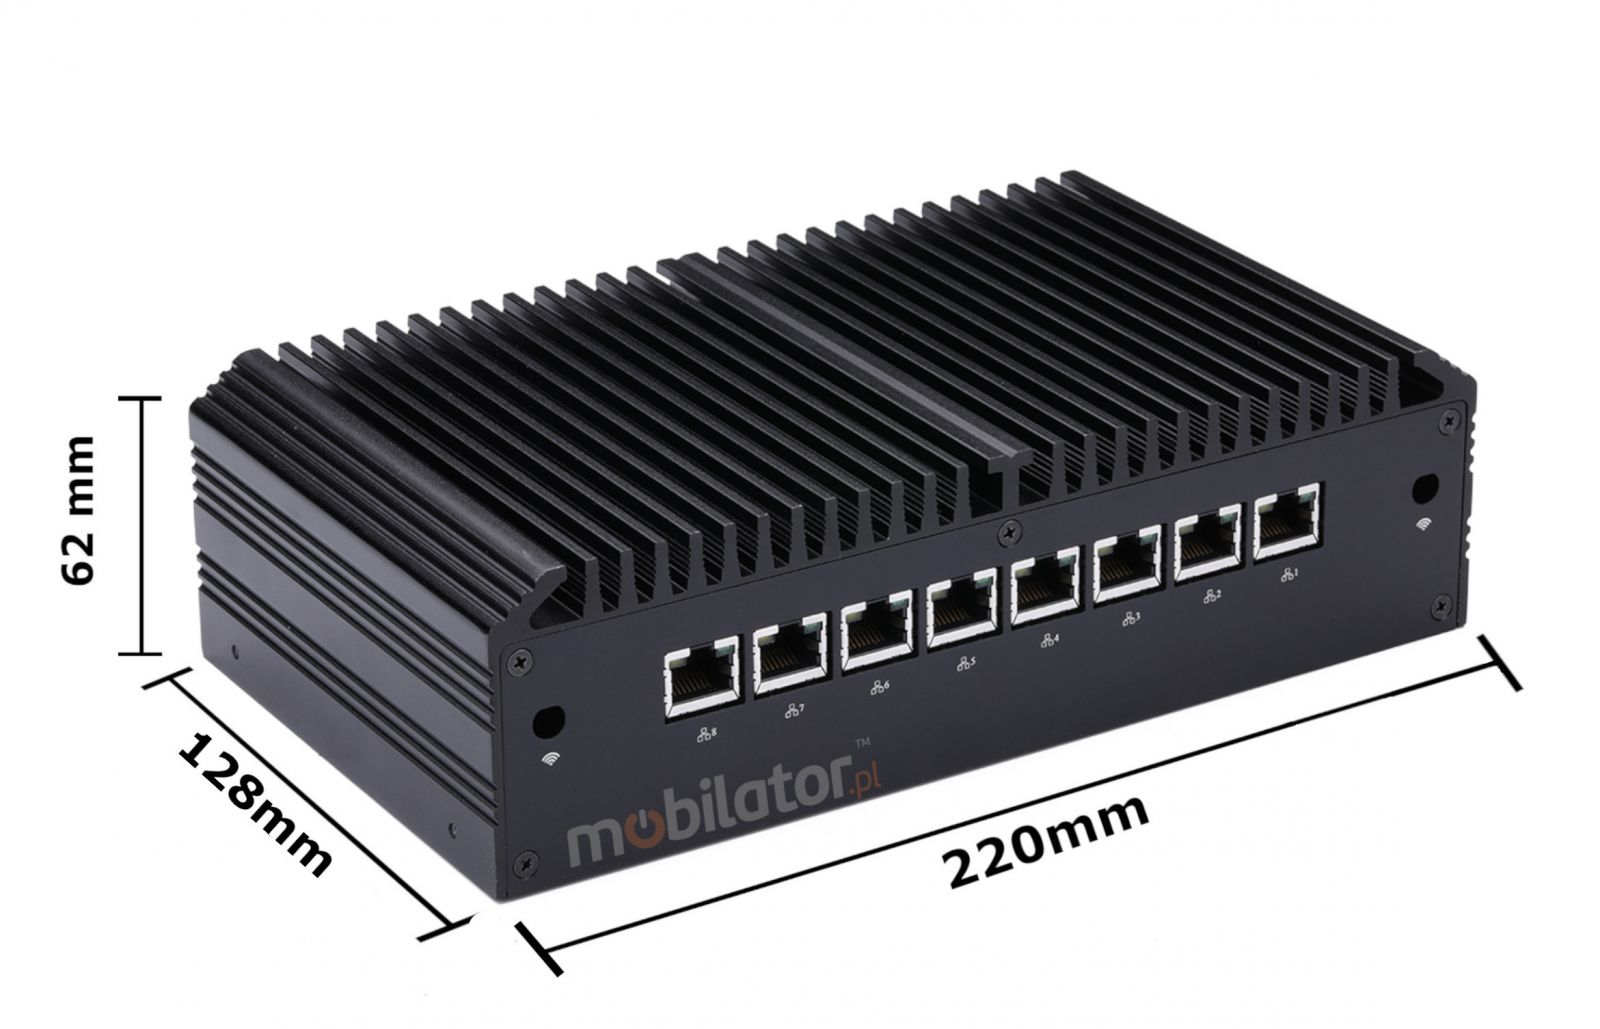 compact size of the Q1012GE mBOX